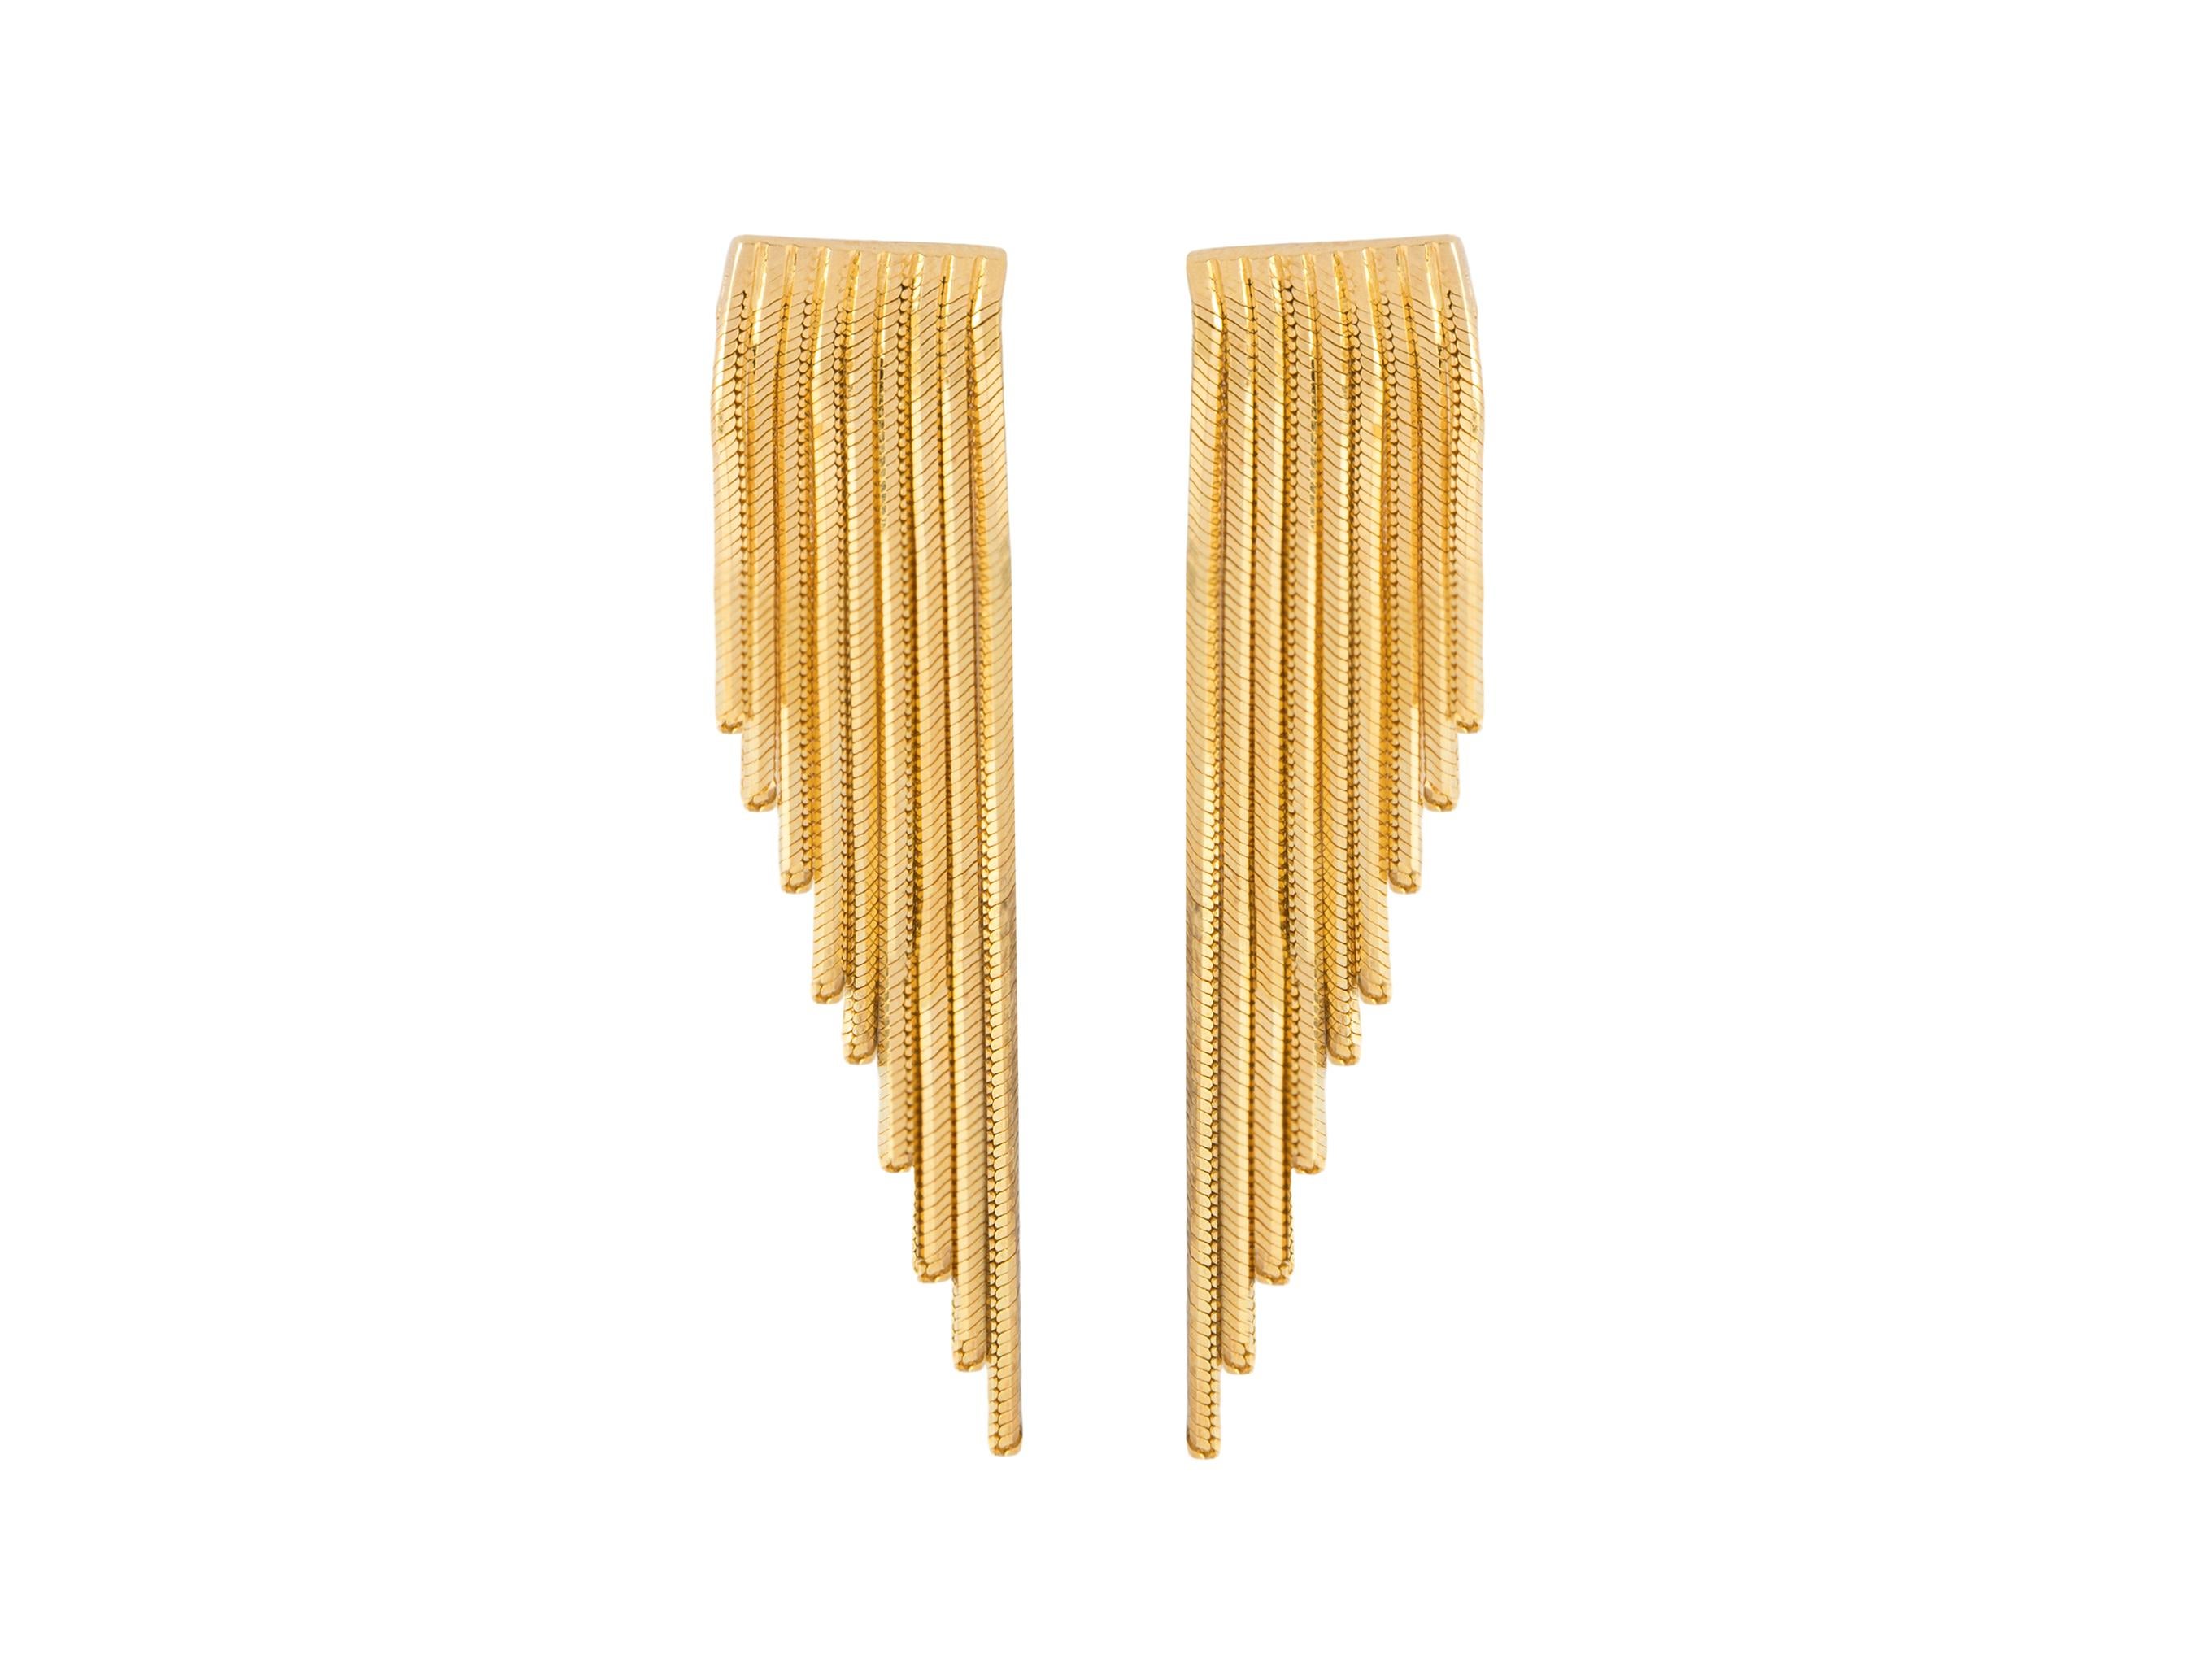 Classic shapes are updated with the inspiration of wings with this pair of earrings from Iosselliani. Specularly designed, the fringed pair is crafted with a cascade of 18 karat gold chains to lend swinging glamour to your daliy wear. Butterfly post